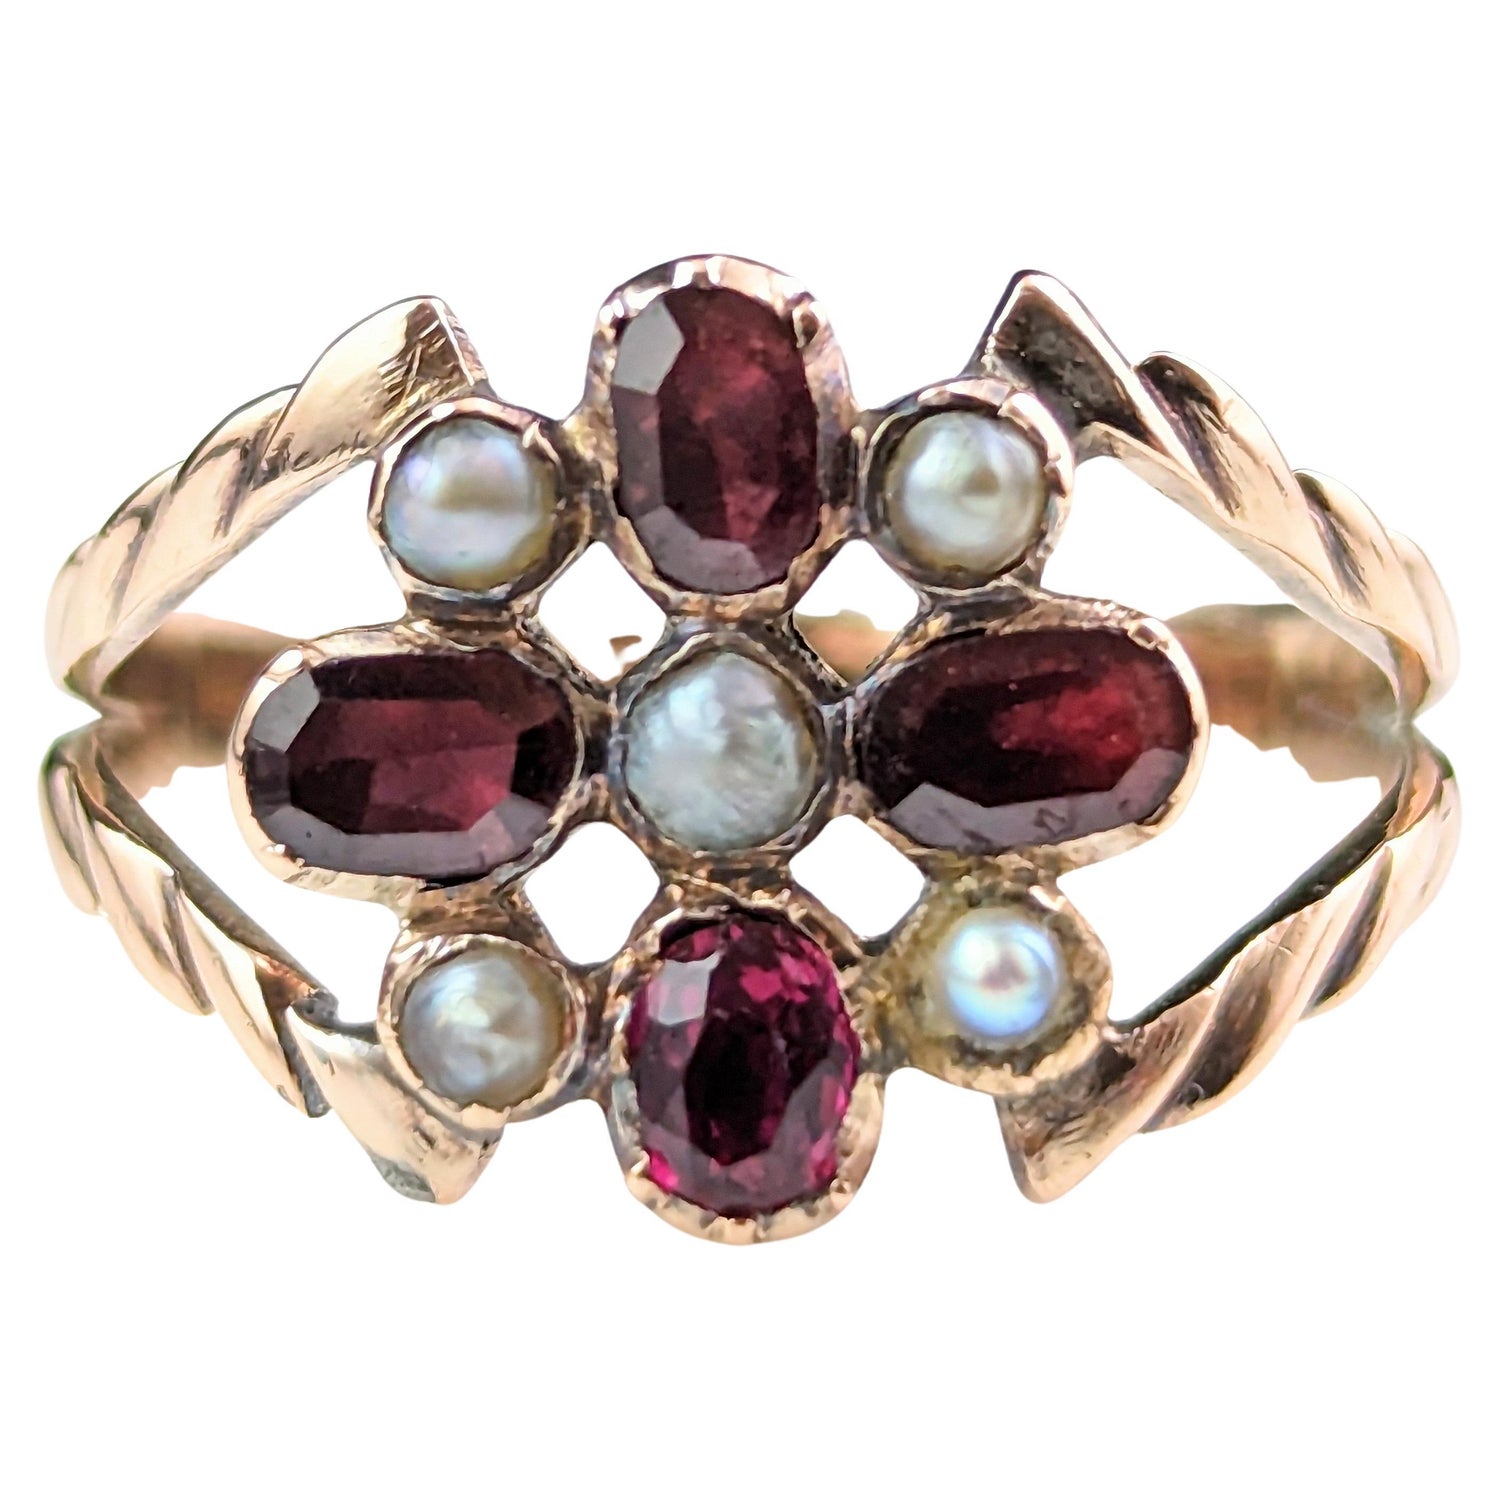 Antique Garnet, Emerald And Ruby Ring At 1Stdibs | Ruby And Garnet Ring,  Garnet And Ruby Ring, Garnet Emerald Ring